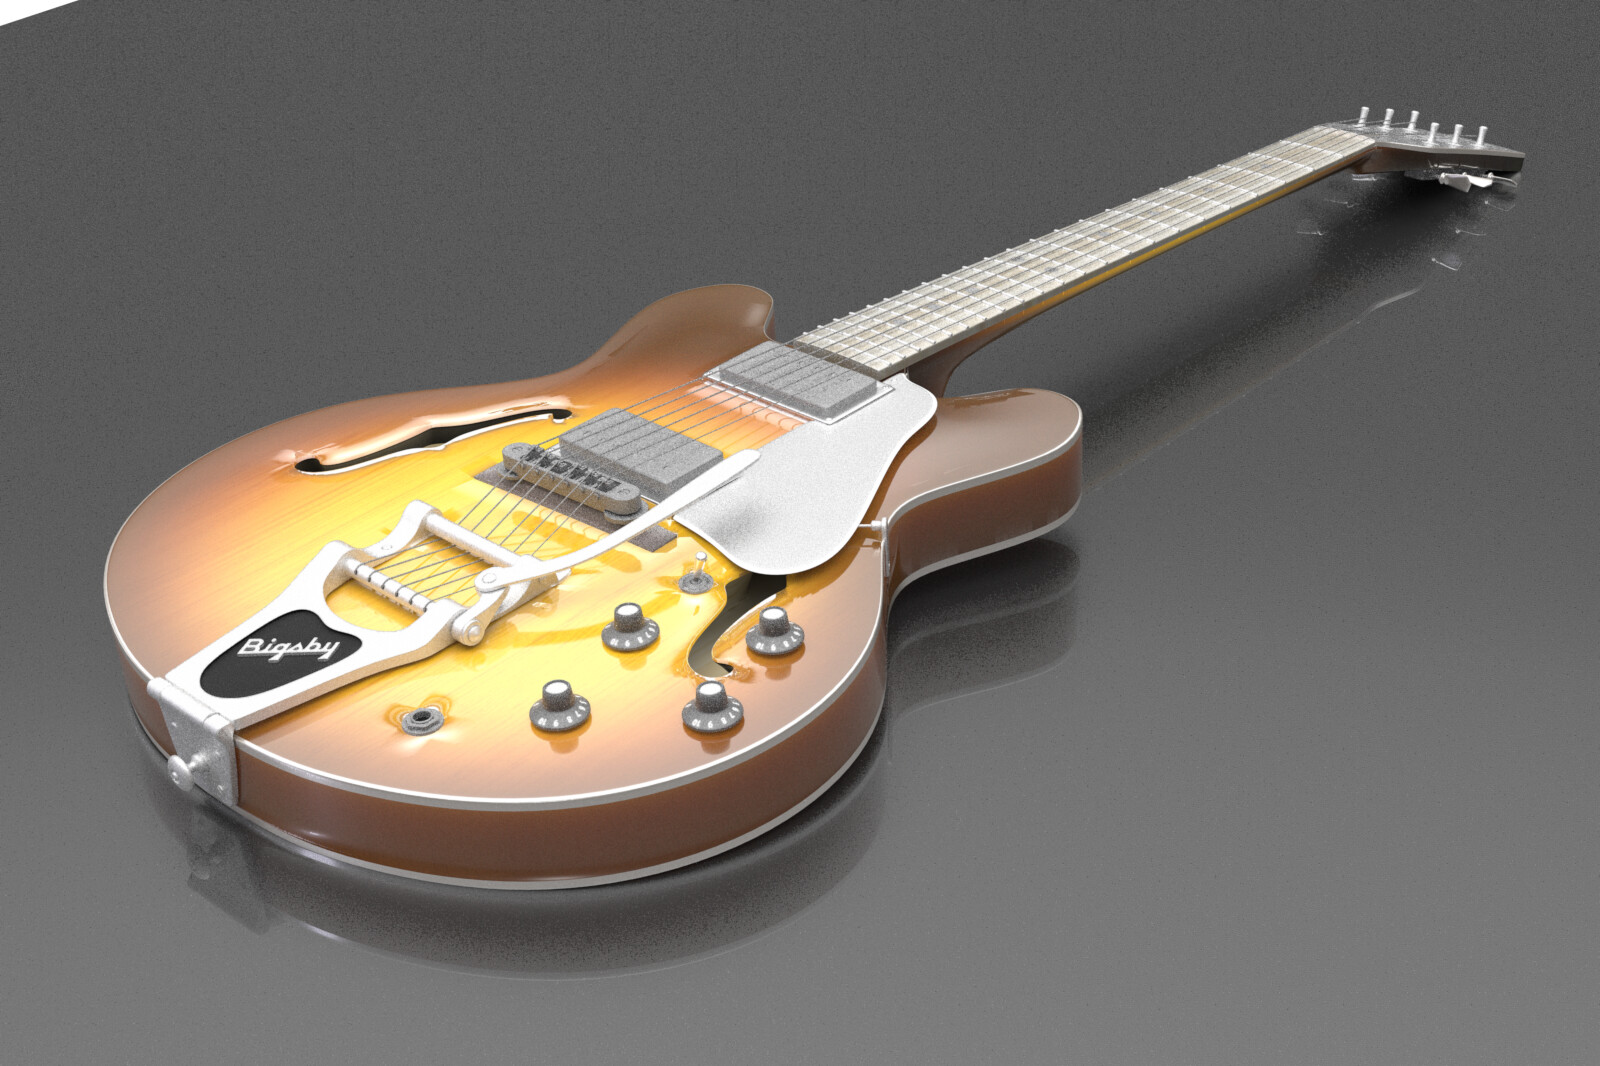 Arch-top jazz guitar modeled in Modo - this is an in-modo render. I converted this model to a native ArchiCAD object, with appropriate vectorial cleanups and the ability for the materials to be easily tweaked in use.